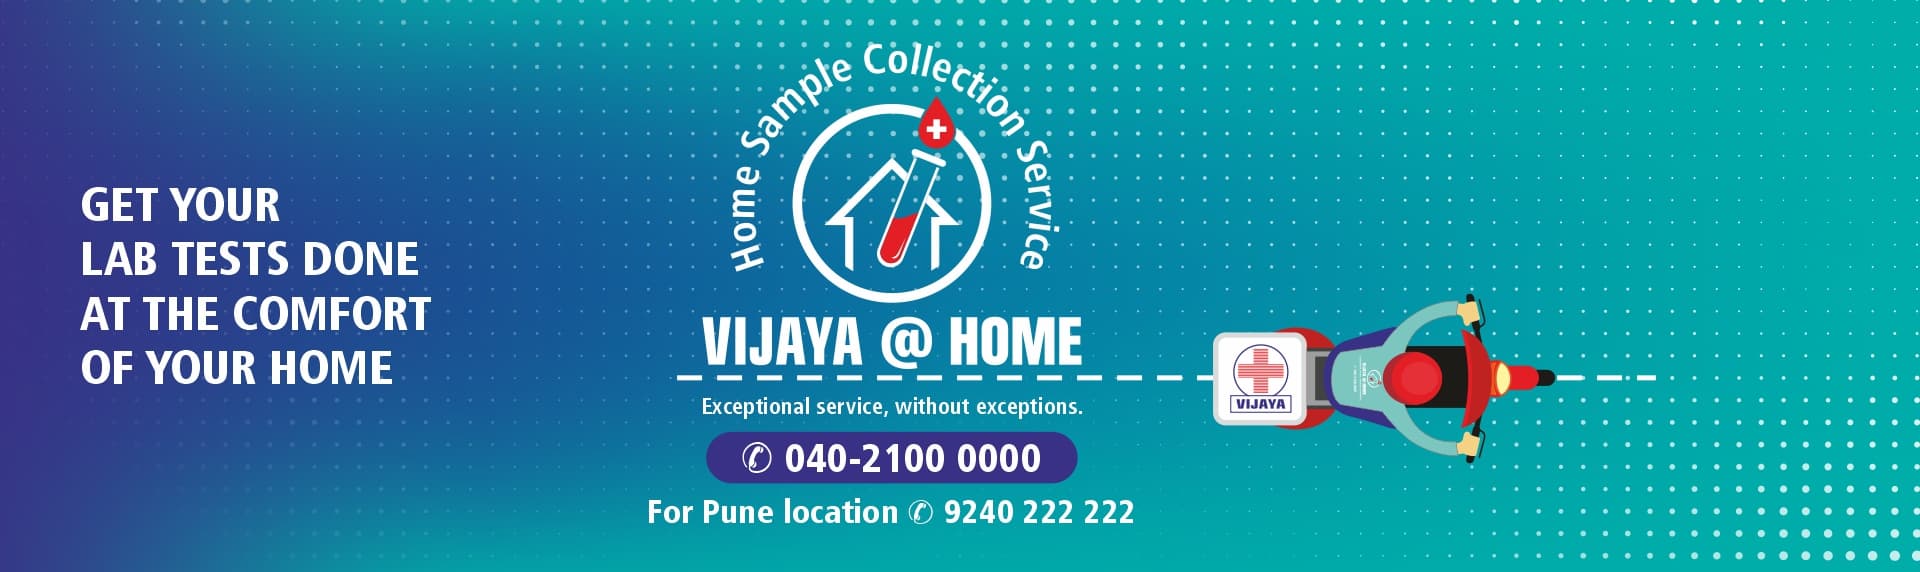 vdc-home-sample-collection-Banners